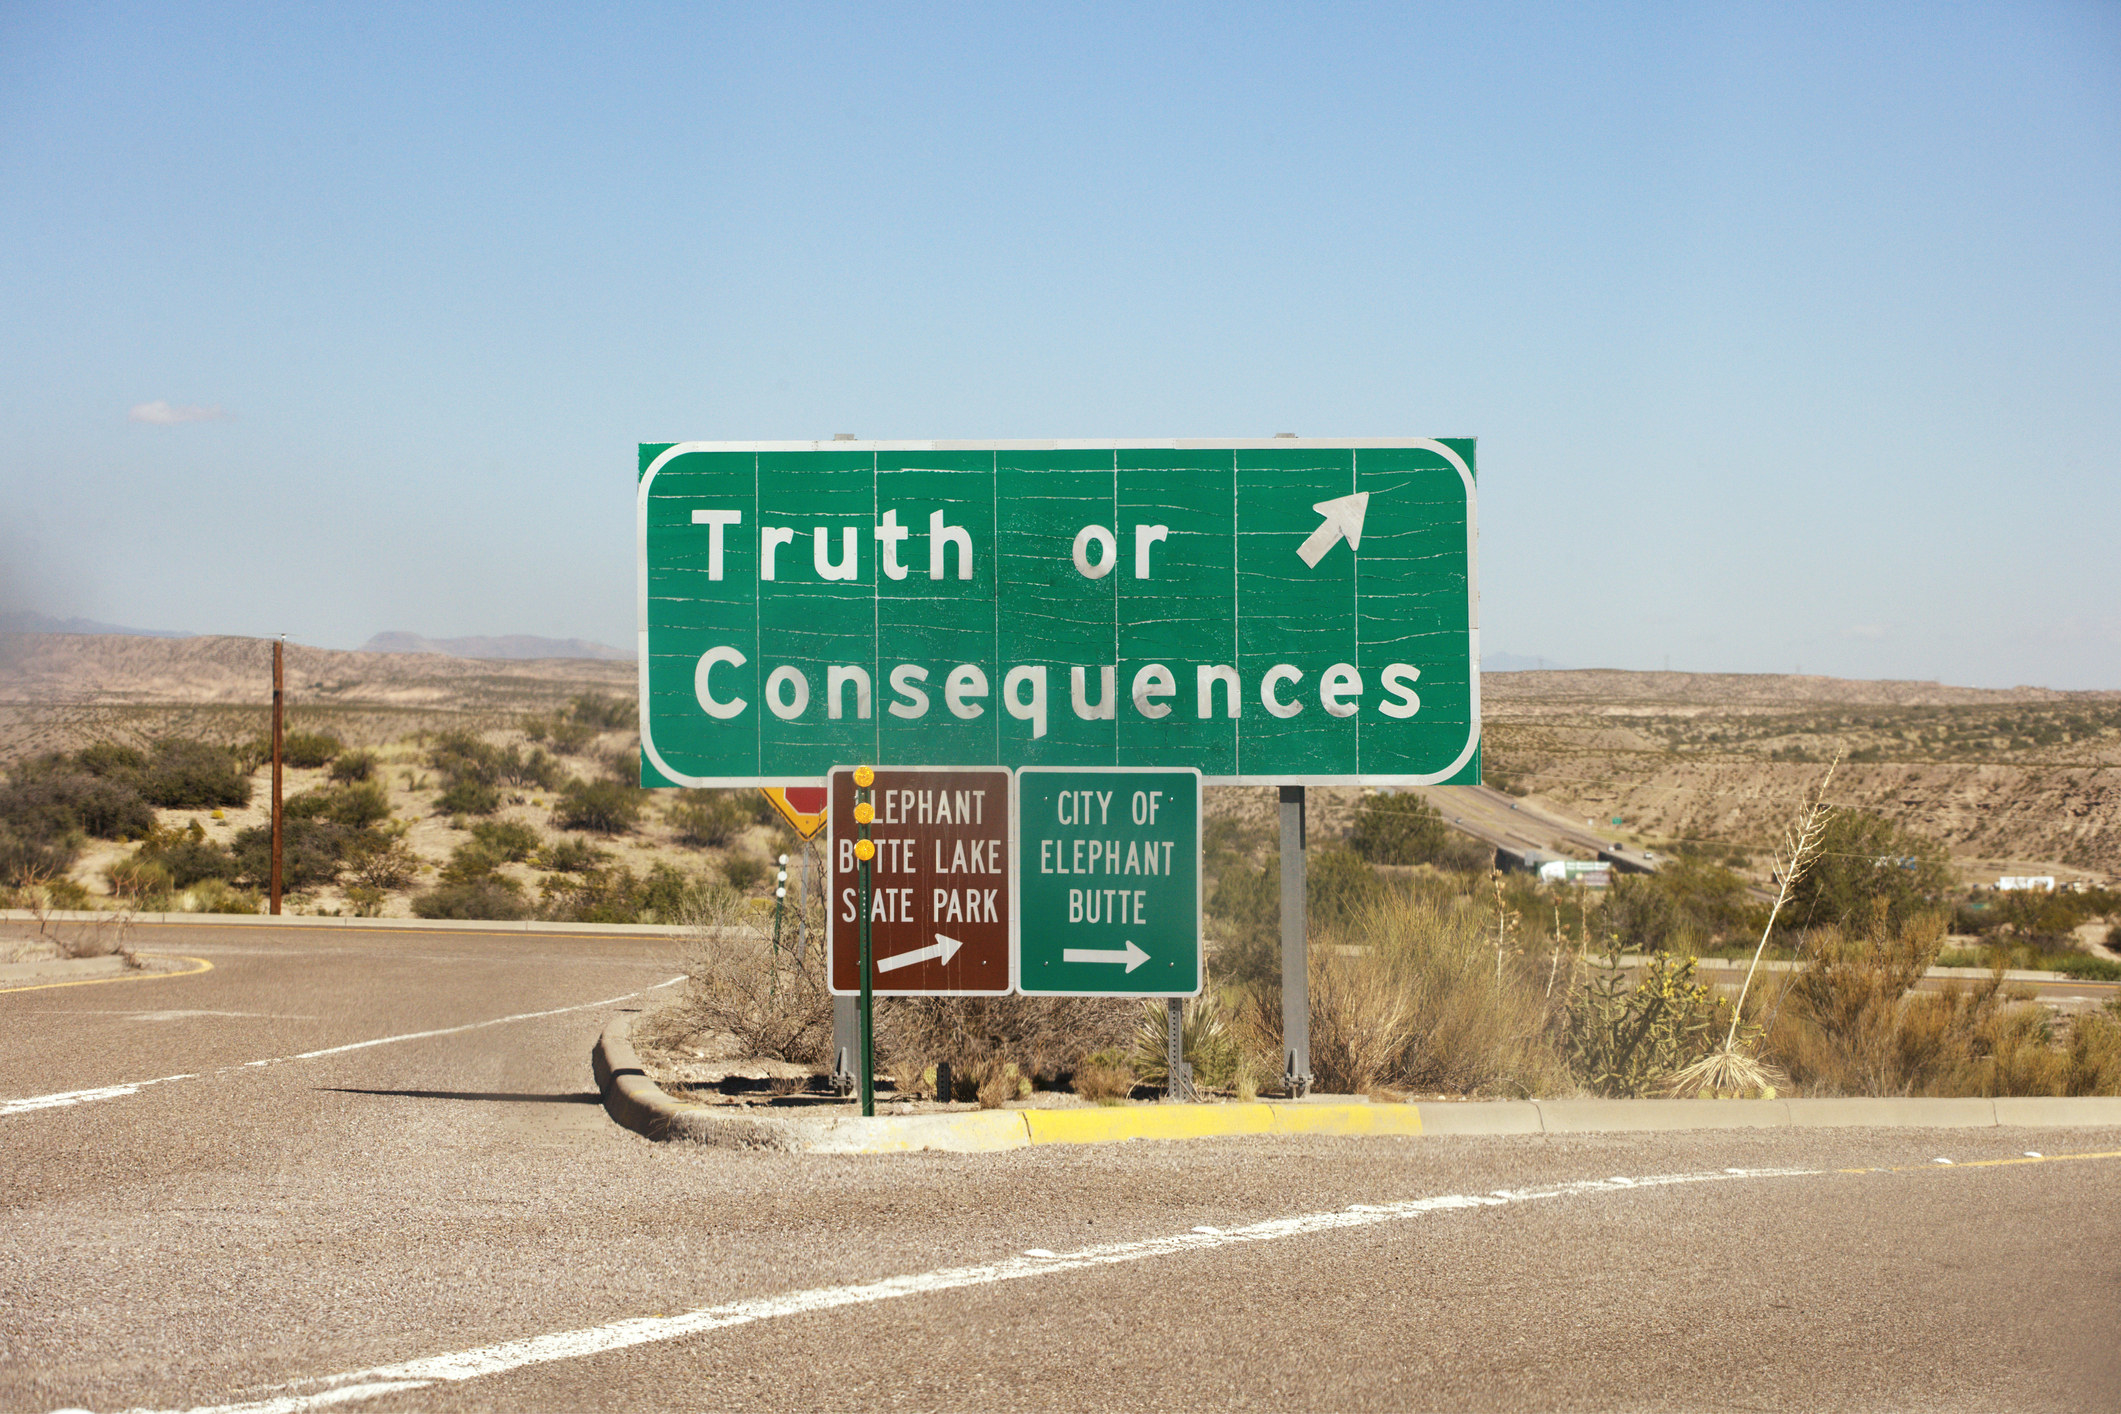 the exist sign for Truth or Consequences